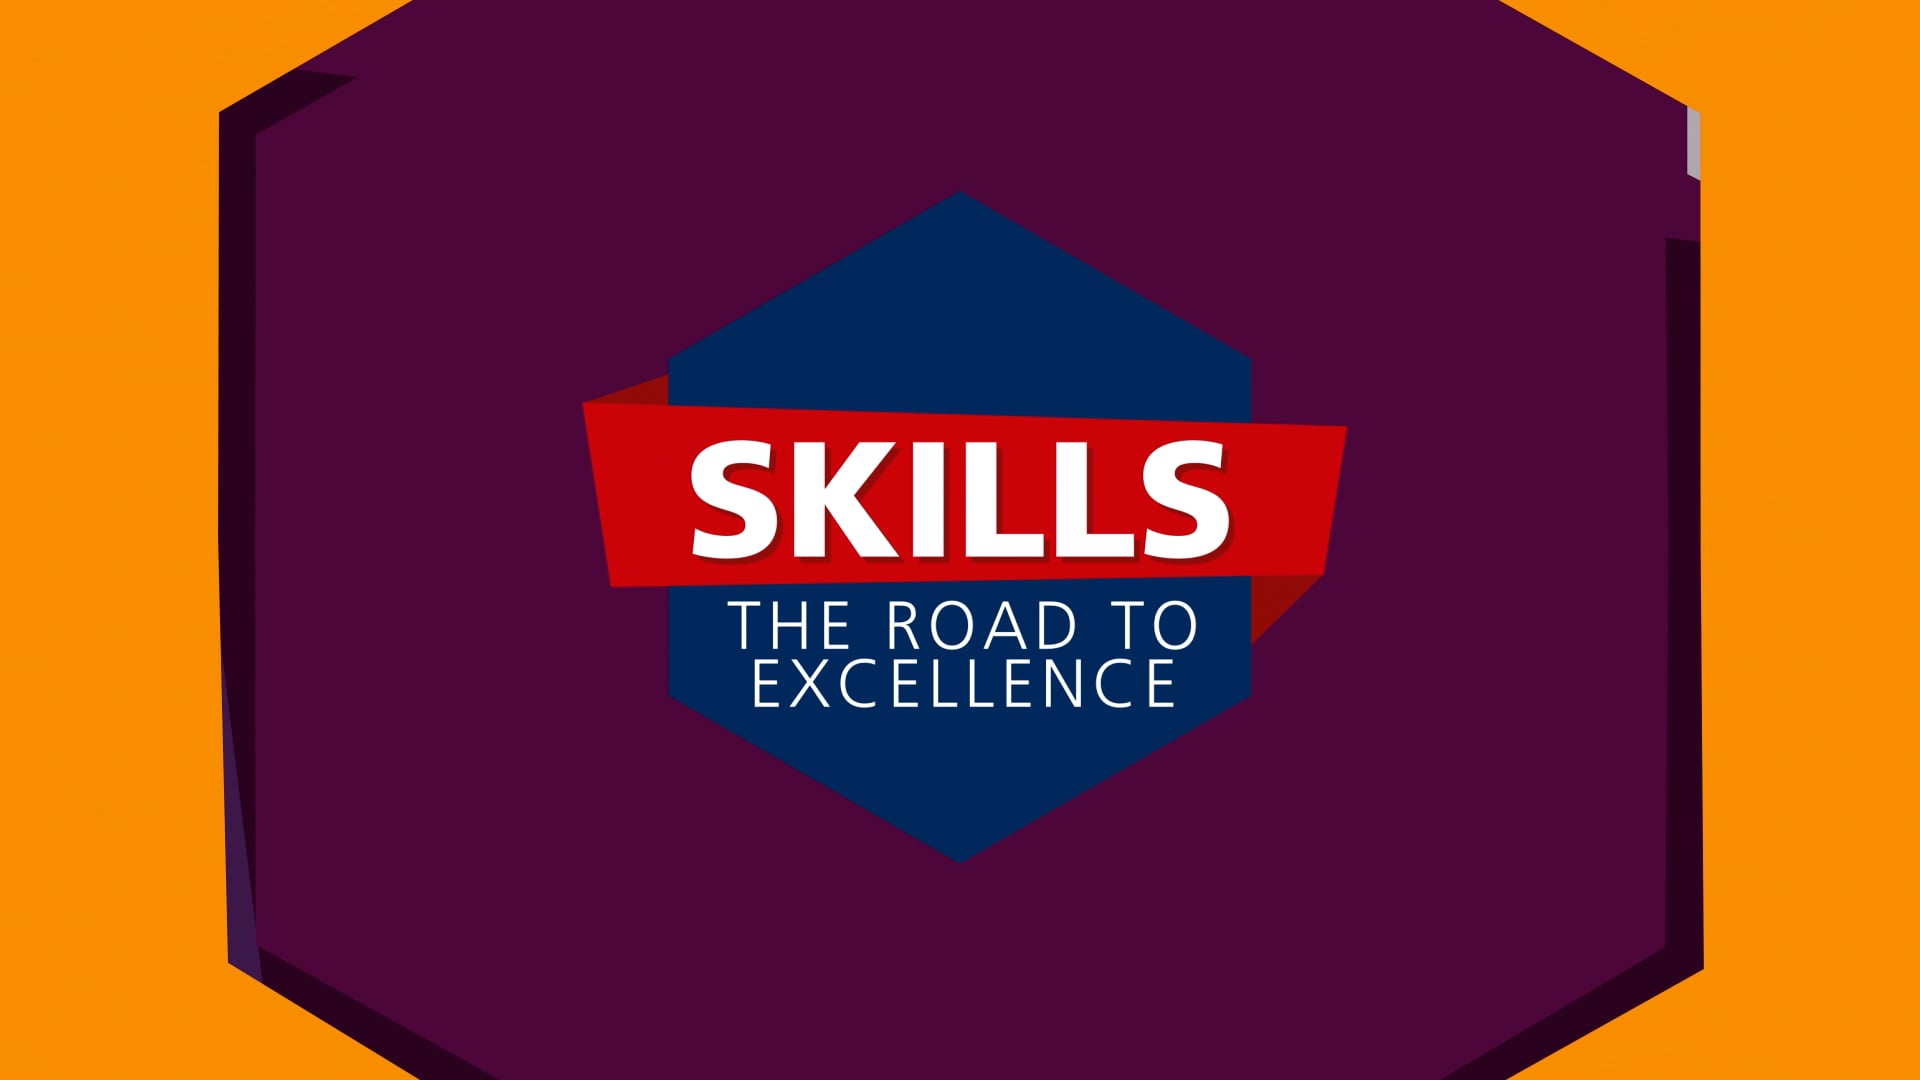 Skills – The Road to Excellence